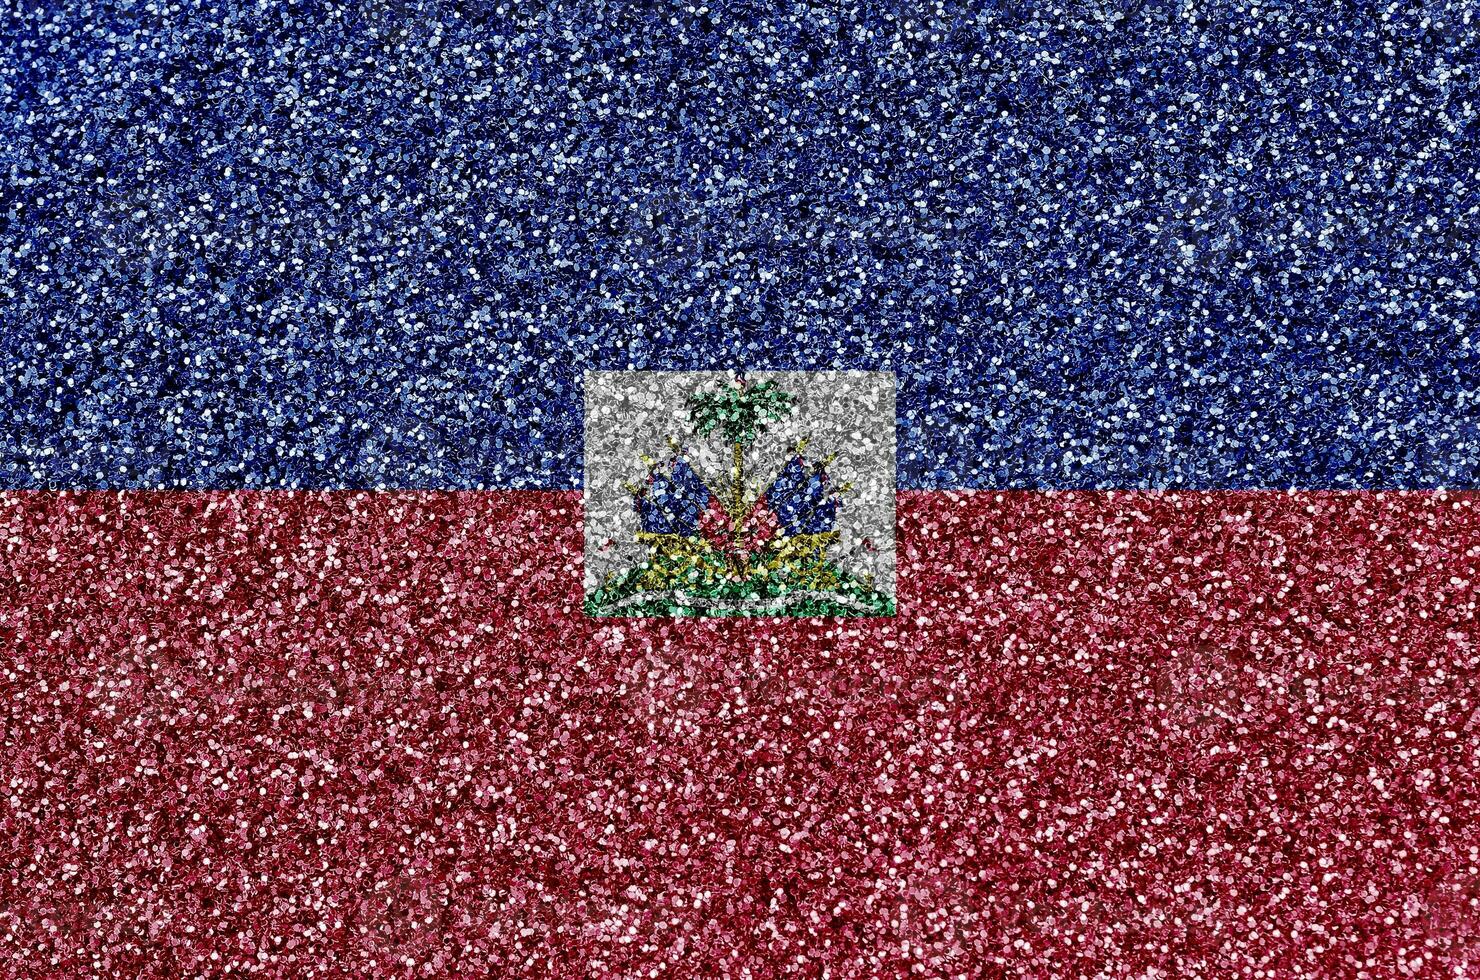 Haiti flag depicted on many small shiny sequins. Colorful festival background for party photo